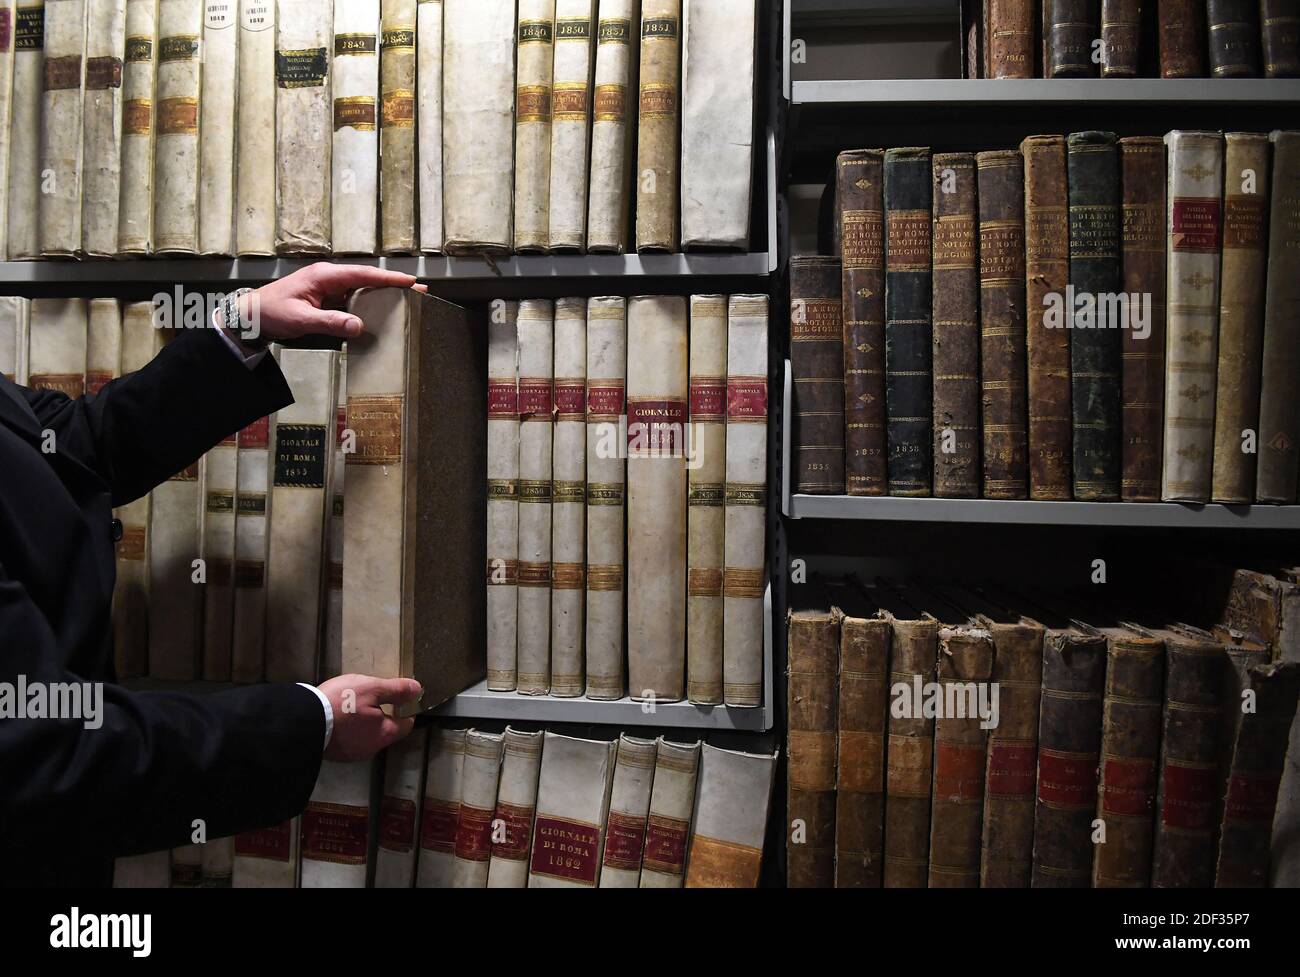 A view of the Vatican Secret Archives on February 29, 2012. Hundred  original and priceless documents selected among the treasures preserved and  cherished by the Vatican Secret Archives for centuries go on